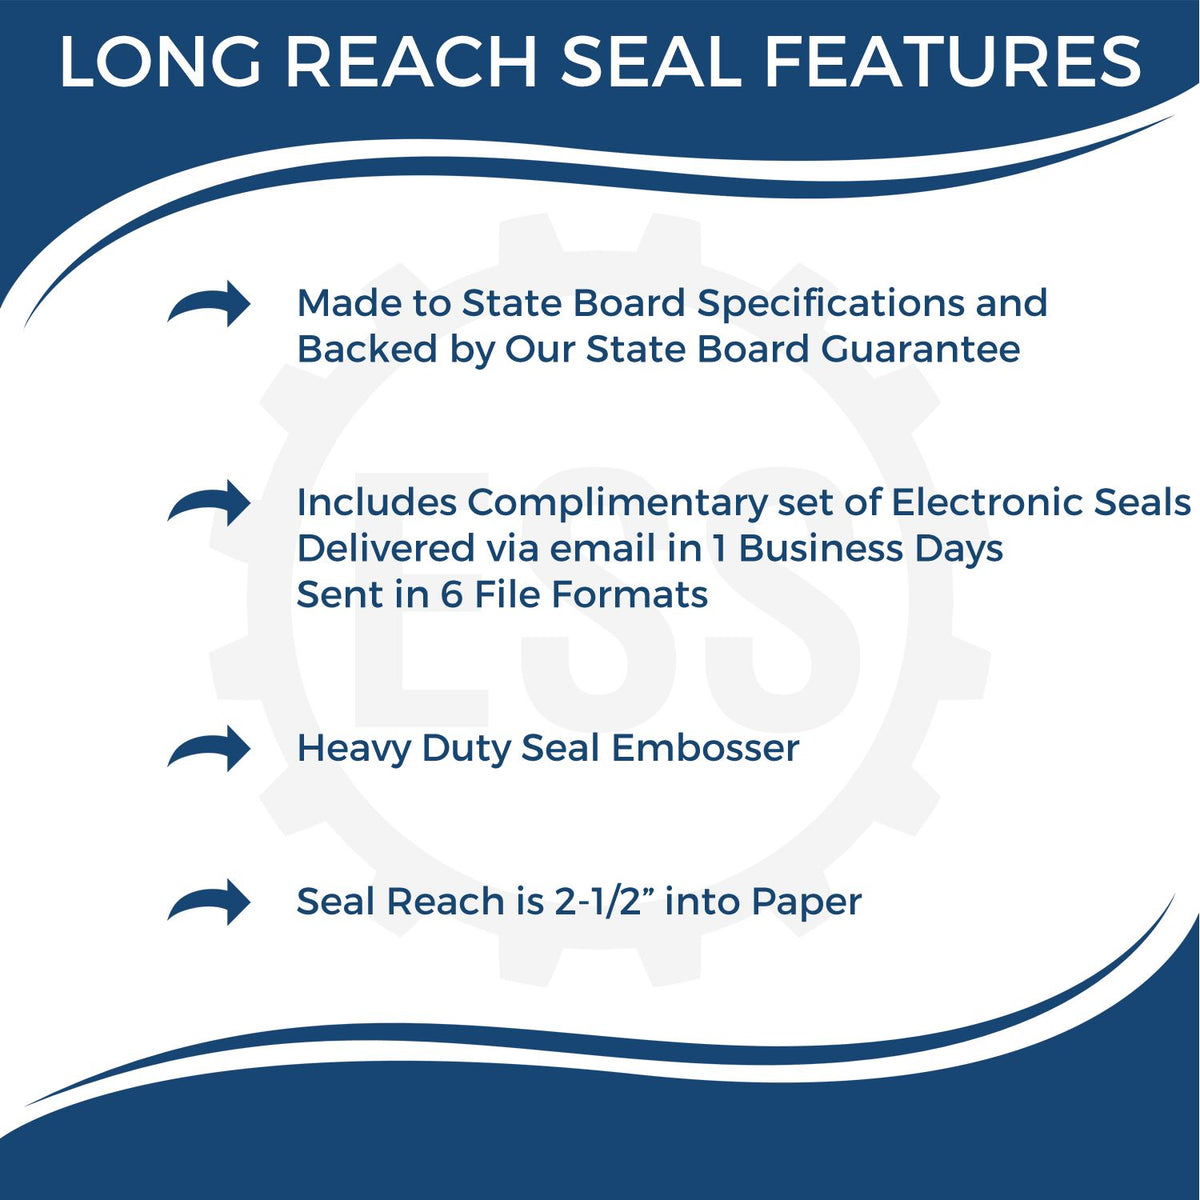 A picture of an infographic highlighting the selling points for the Long Reach New Mexico PE Seal